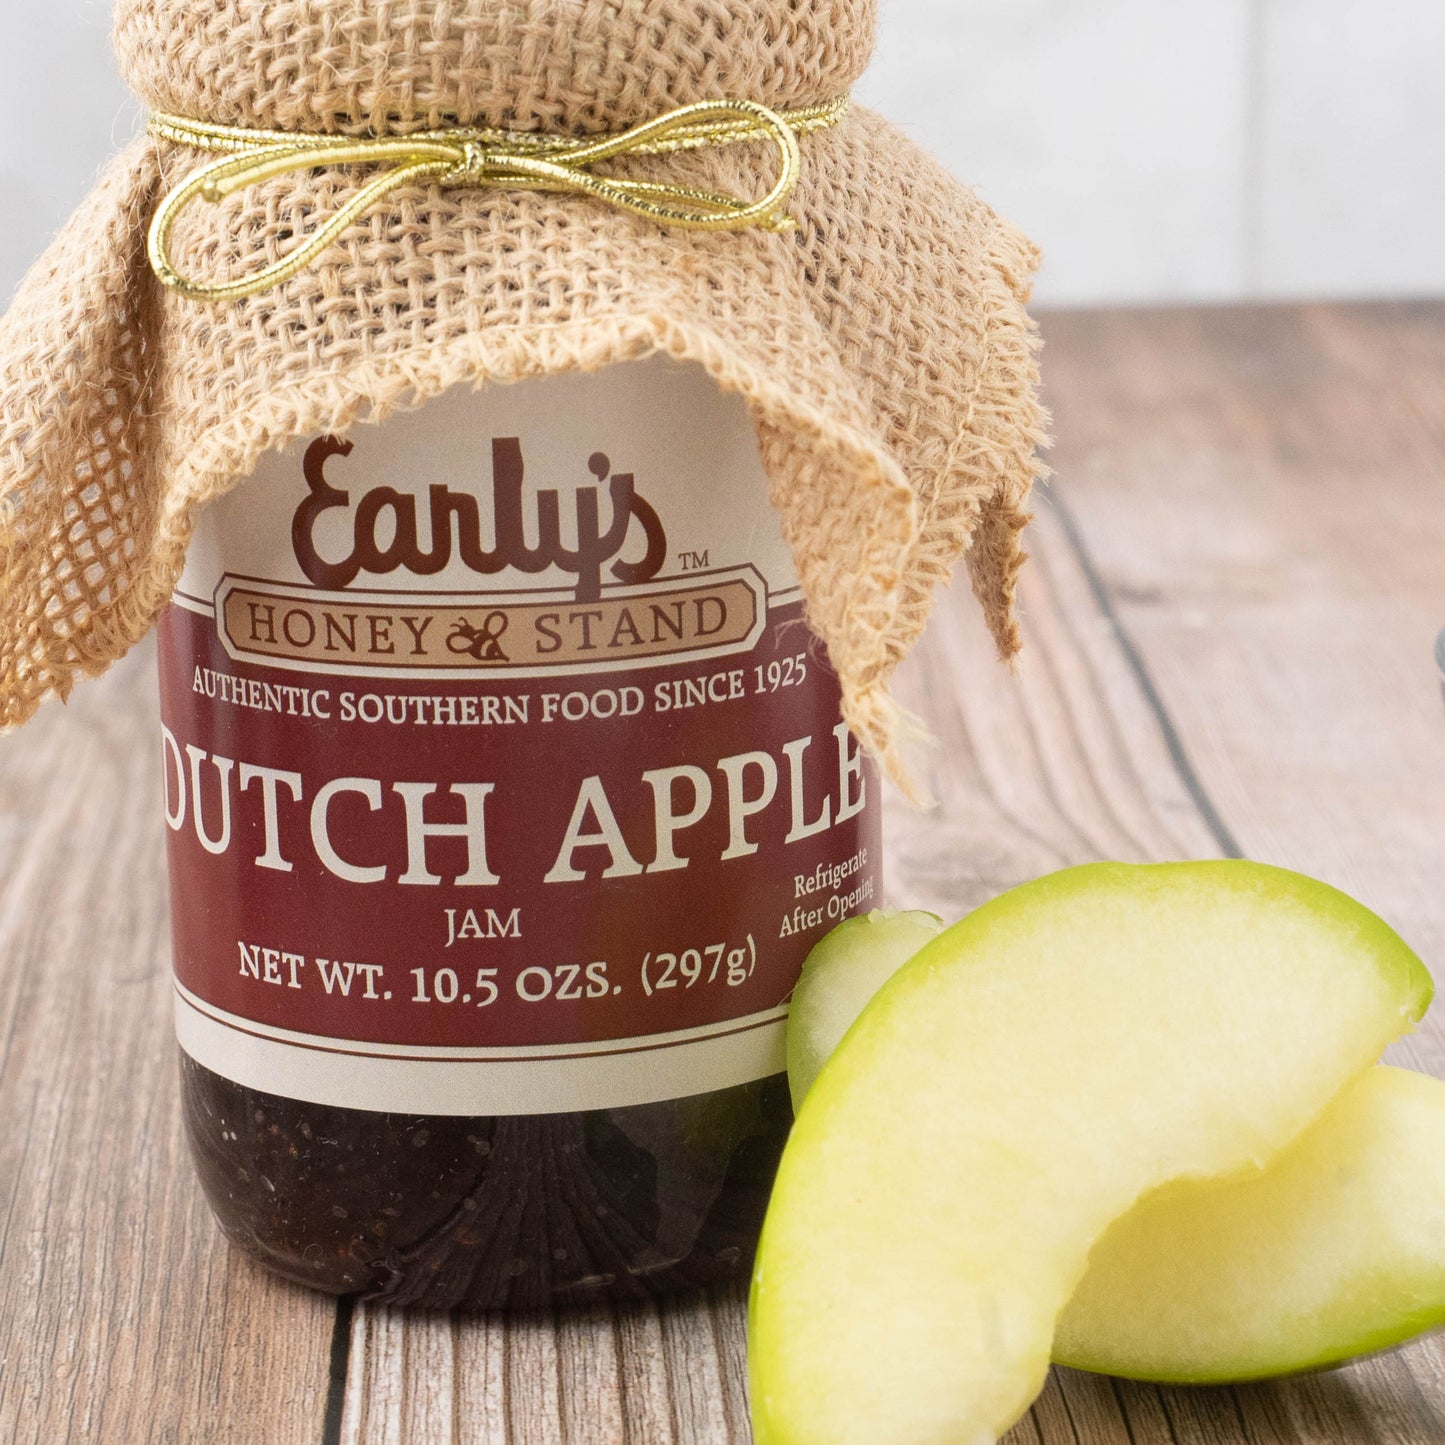 Dutch Apple Jam, Delicious, Favorite Country Jam. A 10.5 oz jar with a burlap topper next to some sliced apples